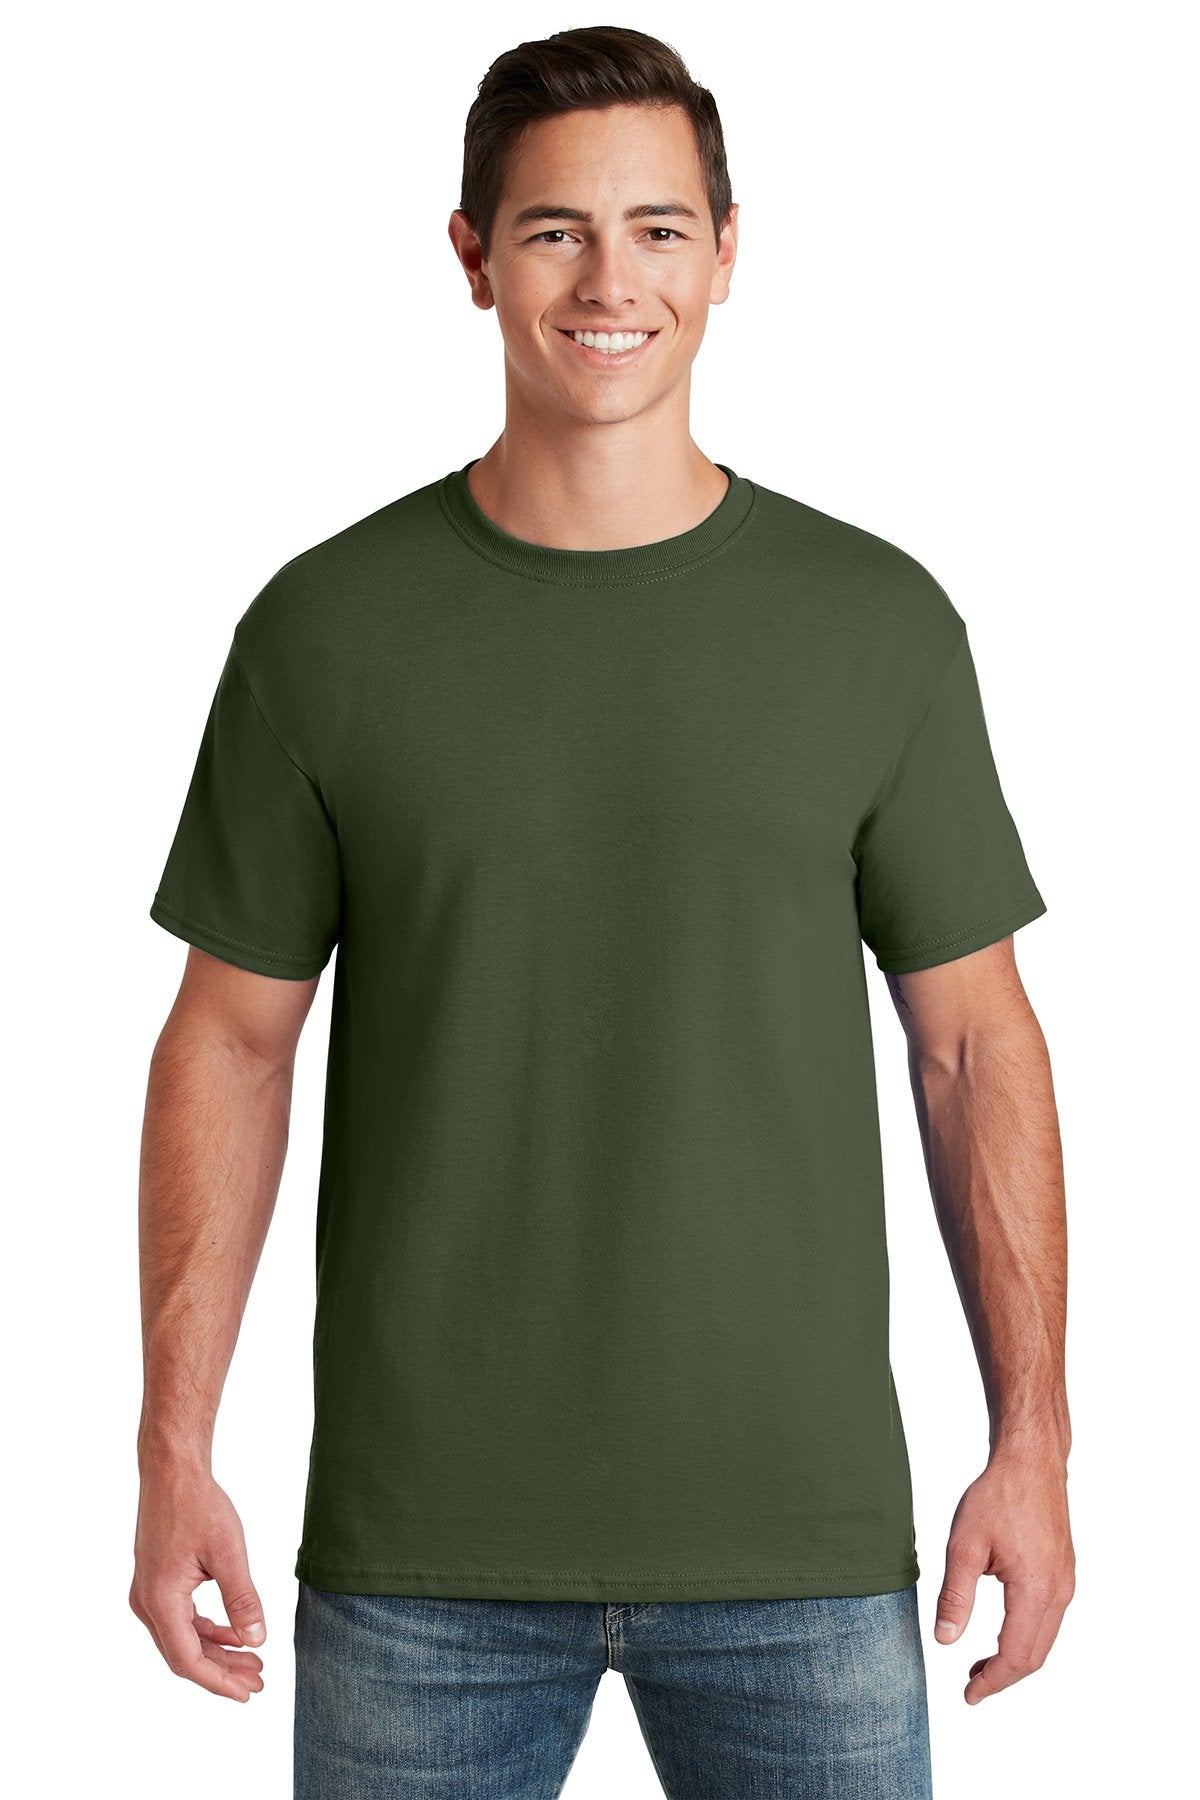 jerzees dri-power active 50/50 cotton/poly t-shirt 29m military green